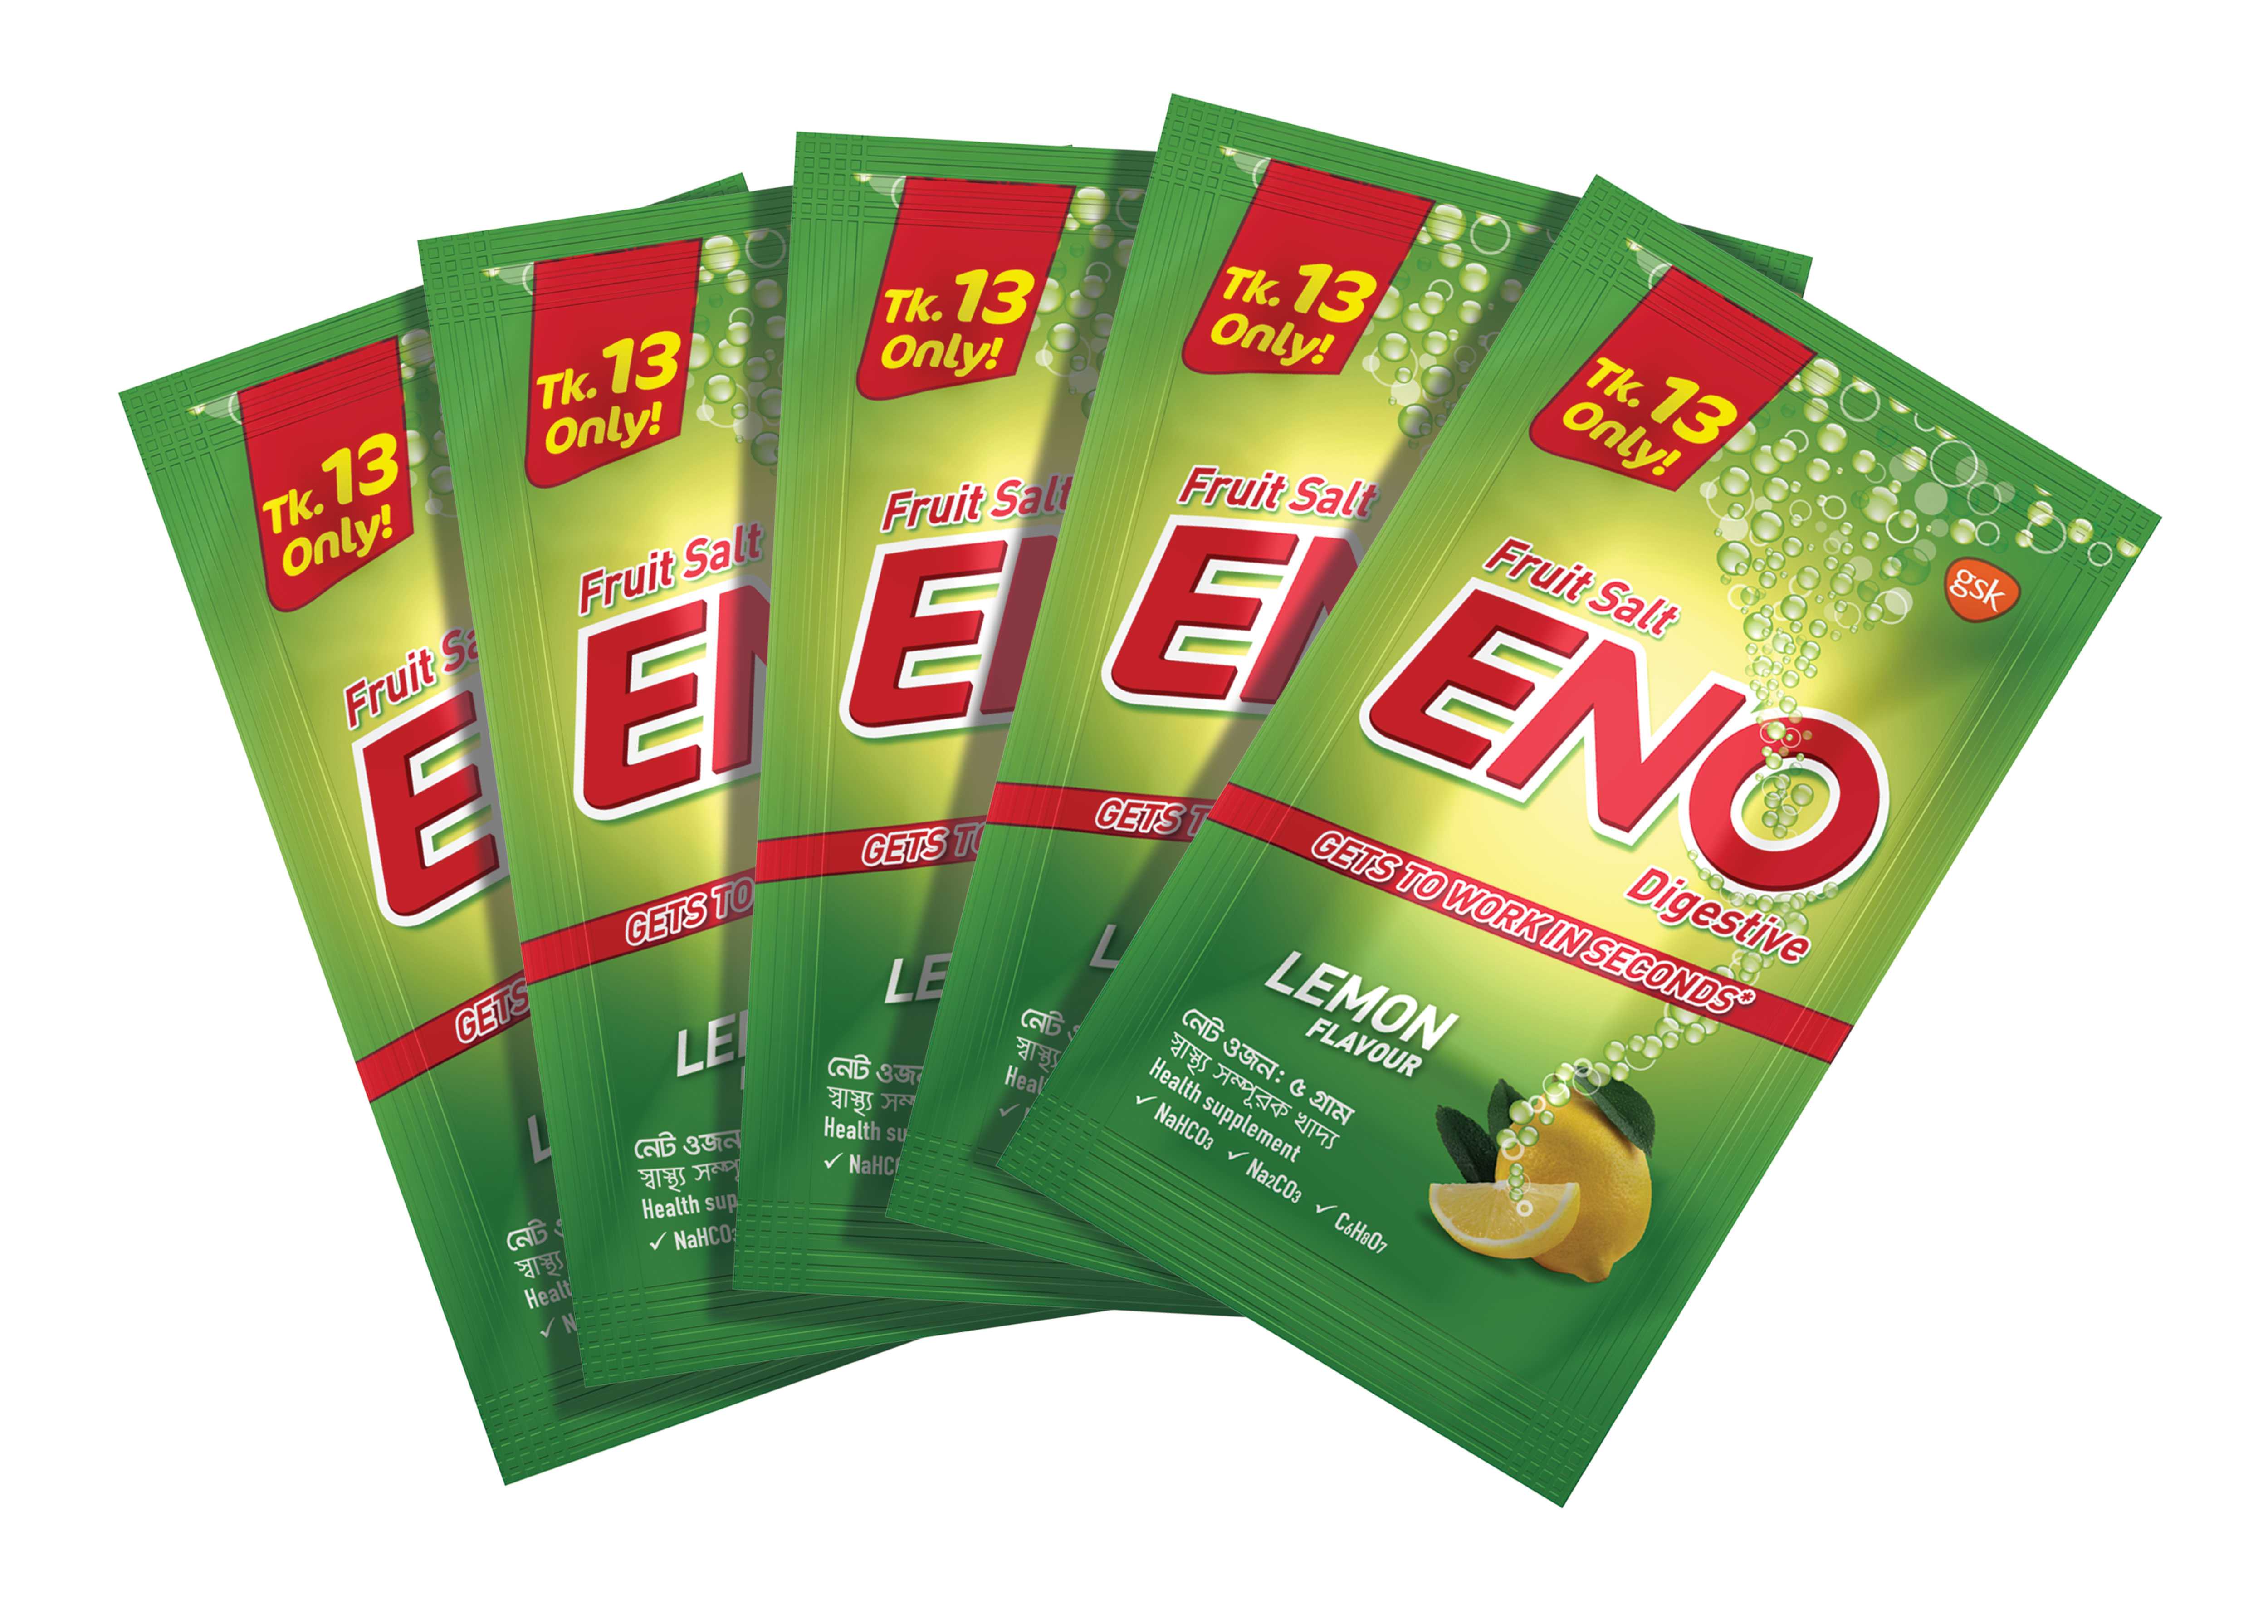 ENO Lemon Flavor (5 gm*5) - GroceryOnline Grocery Shopping and ...